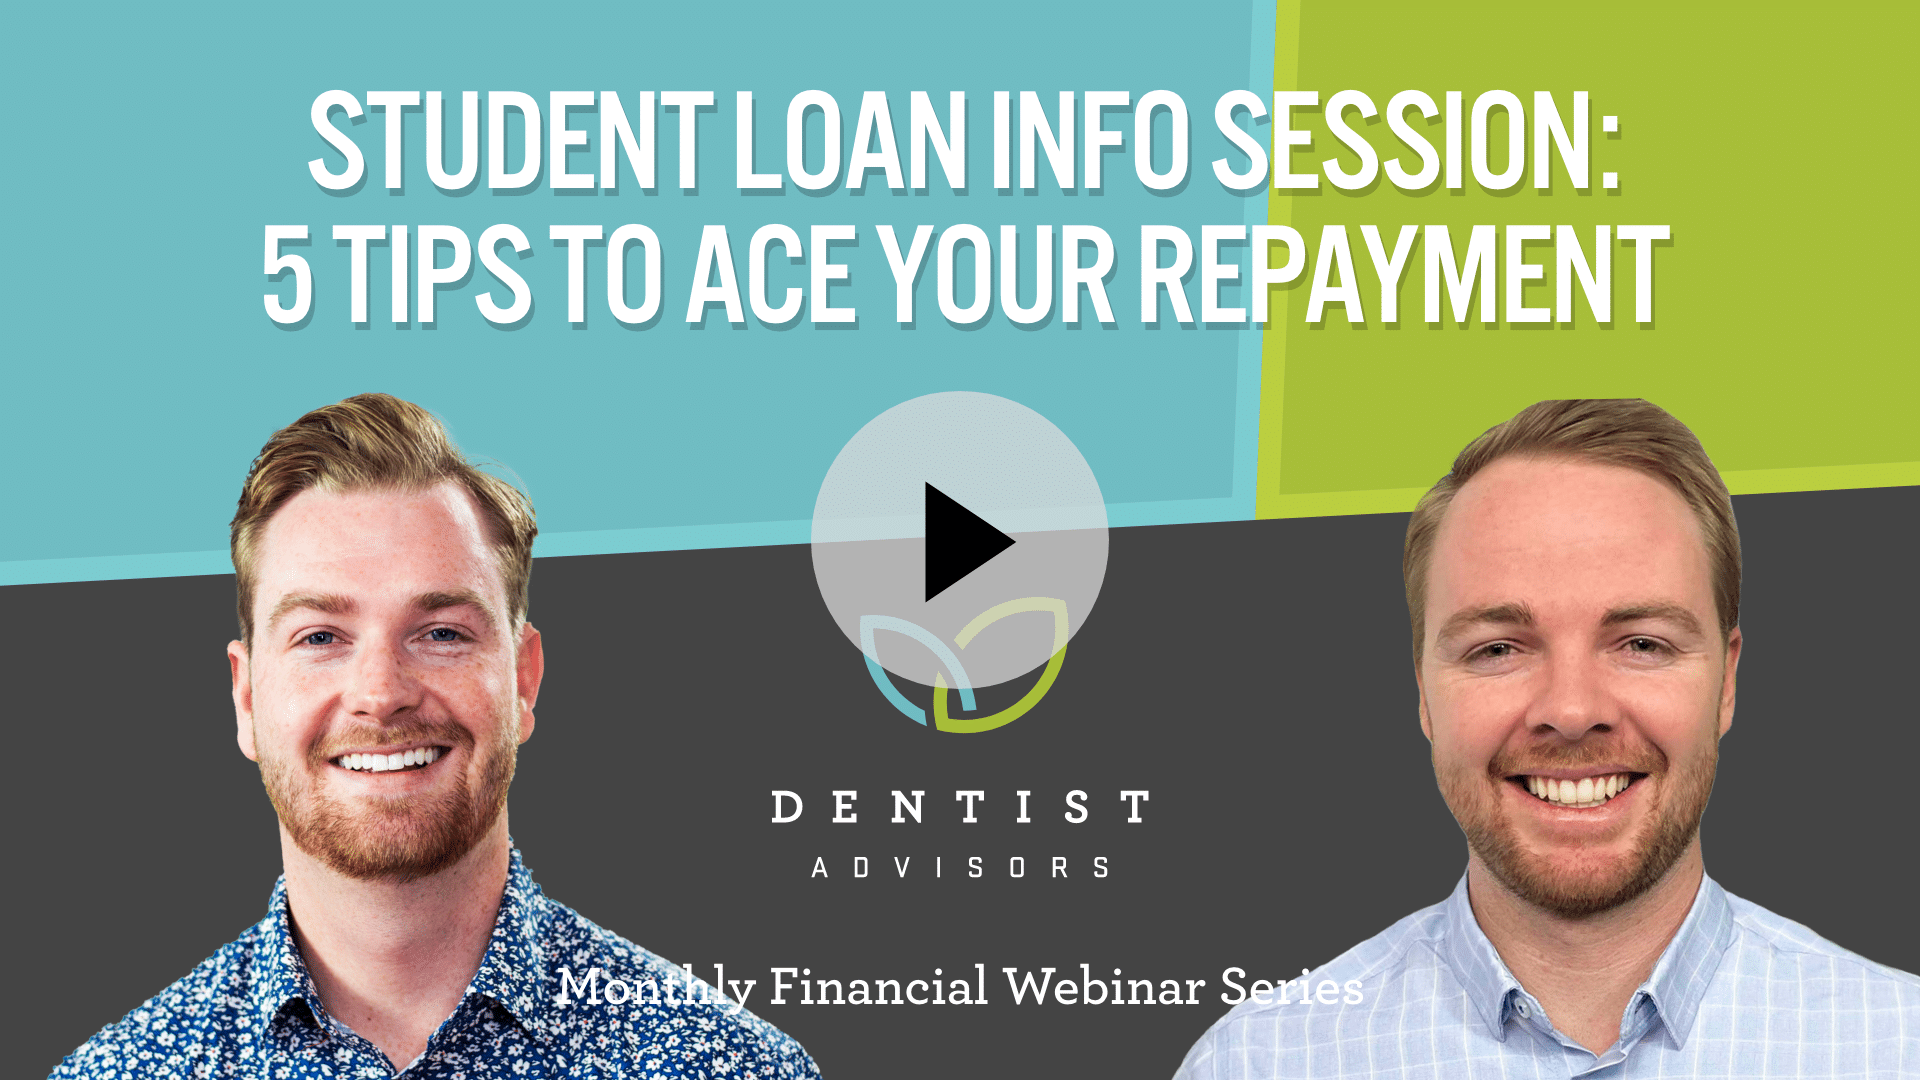 5 tips to ace your student loan repayment